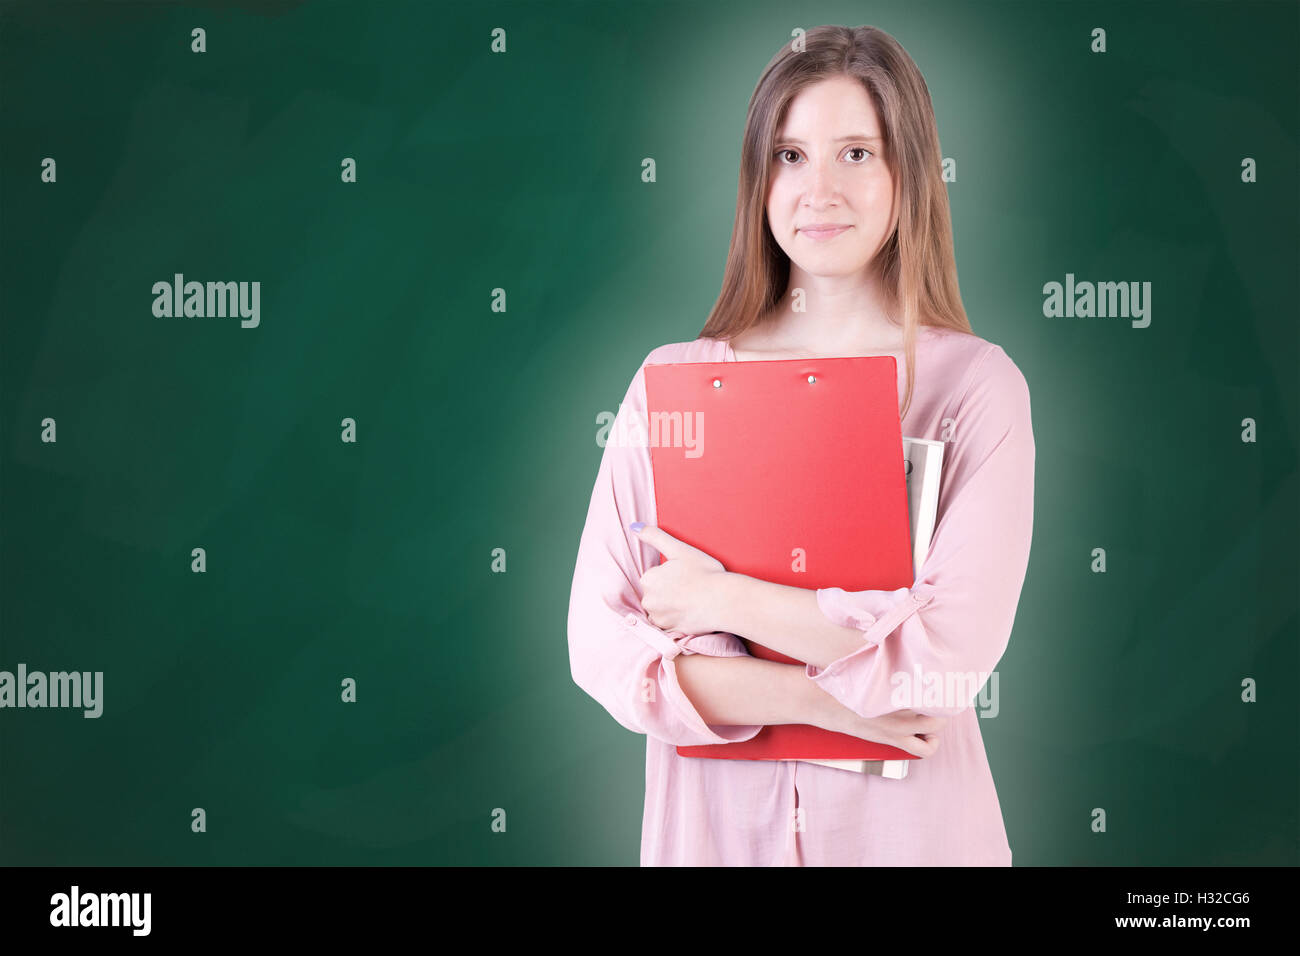 Young woman carrying notebooks in her arms, in a green chalkboard background Stock Photo